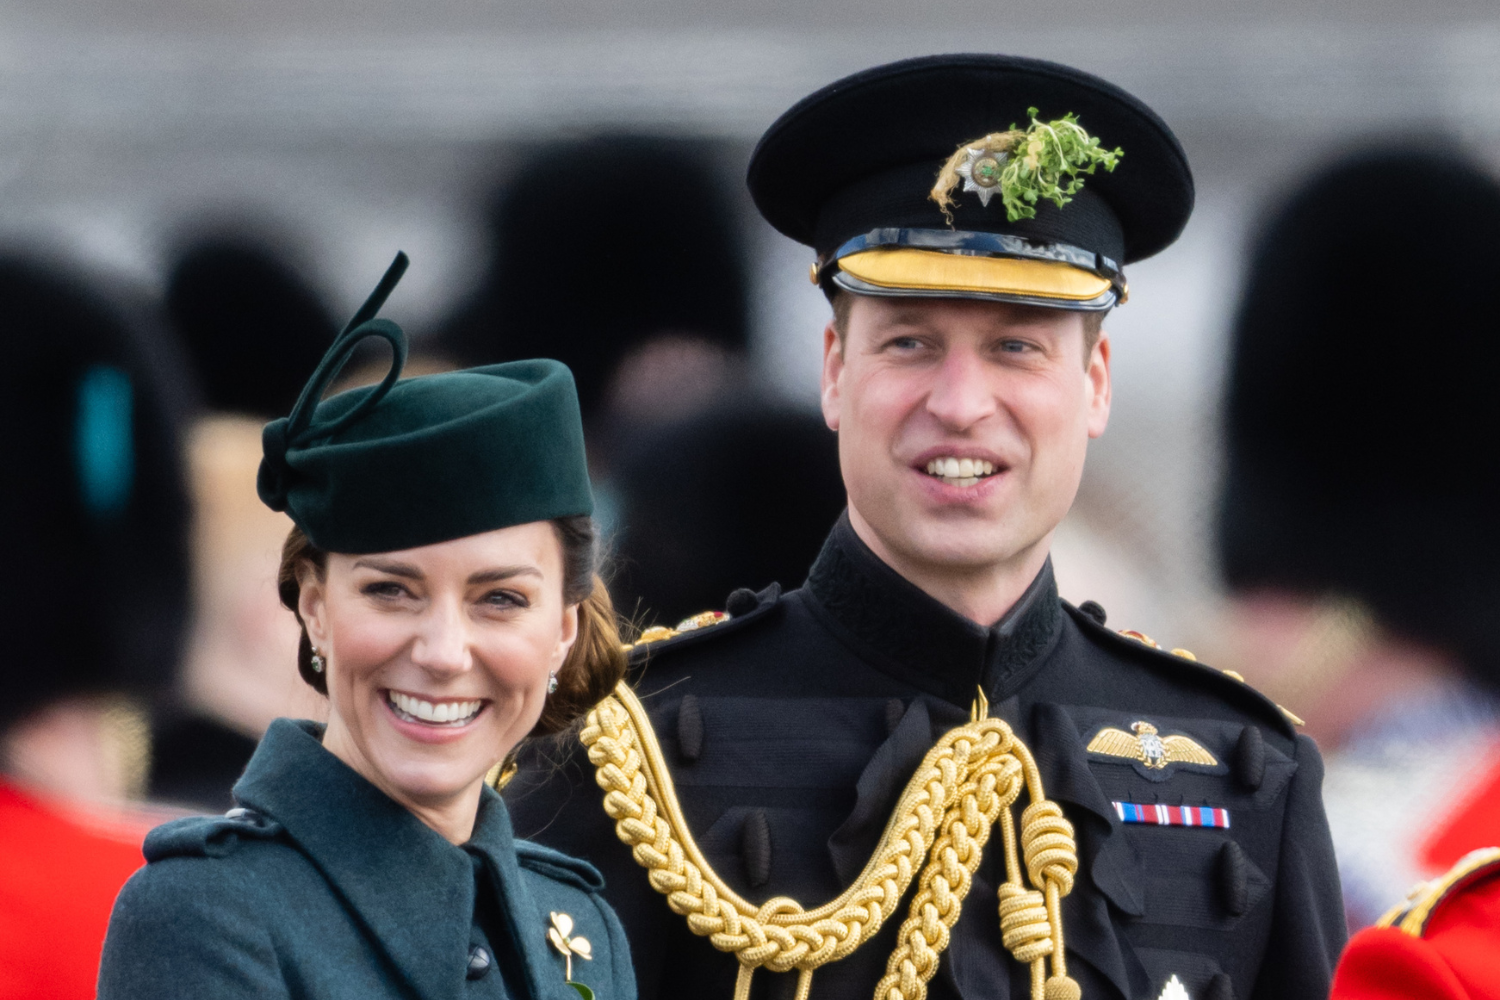 Prince William and Kate Middleton's 'Funny' Speech Outtake Shared by Fans